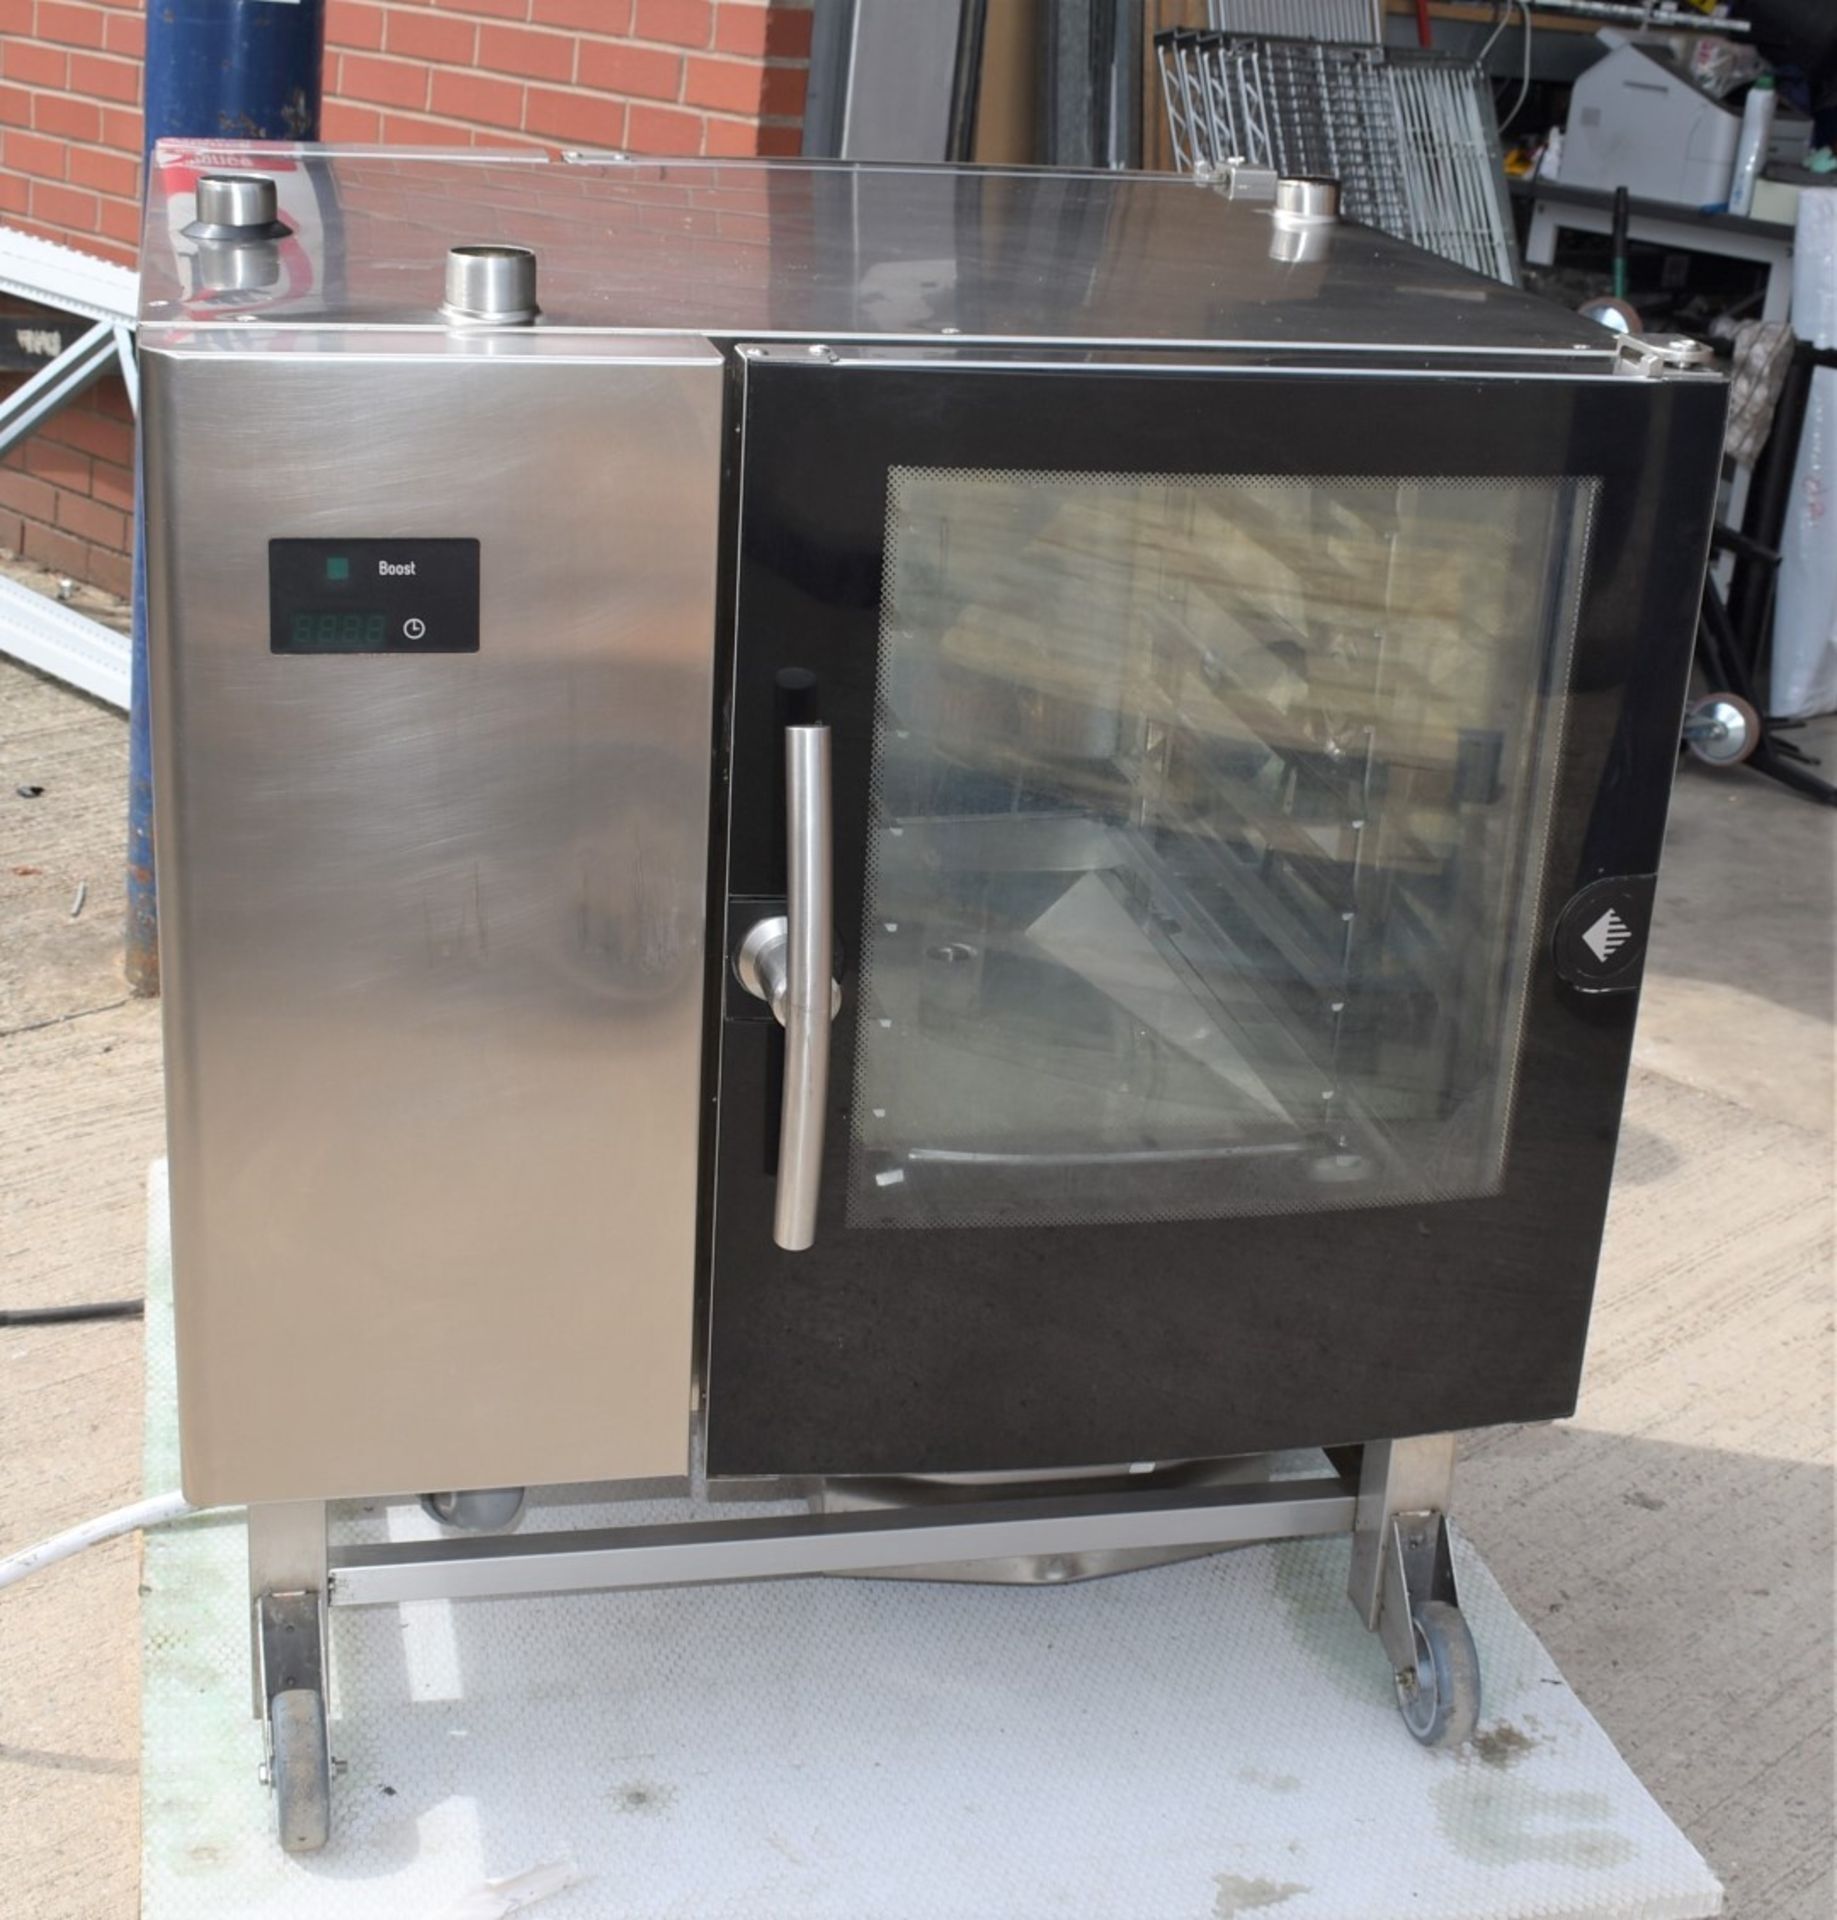 1 x Houno 6 Grid Electric Passthrough Door Combi Oven - 3 Phase With Pre-Set Cooking Options - Image 3 of 17